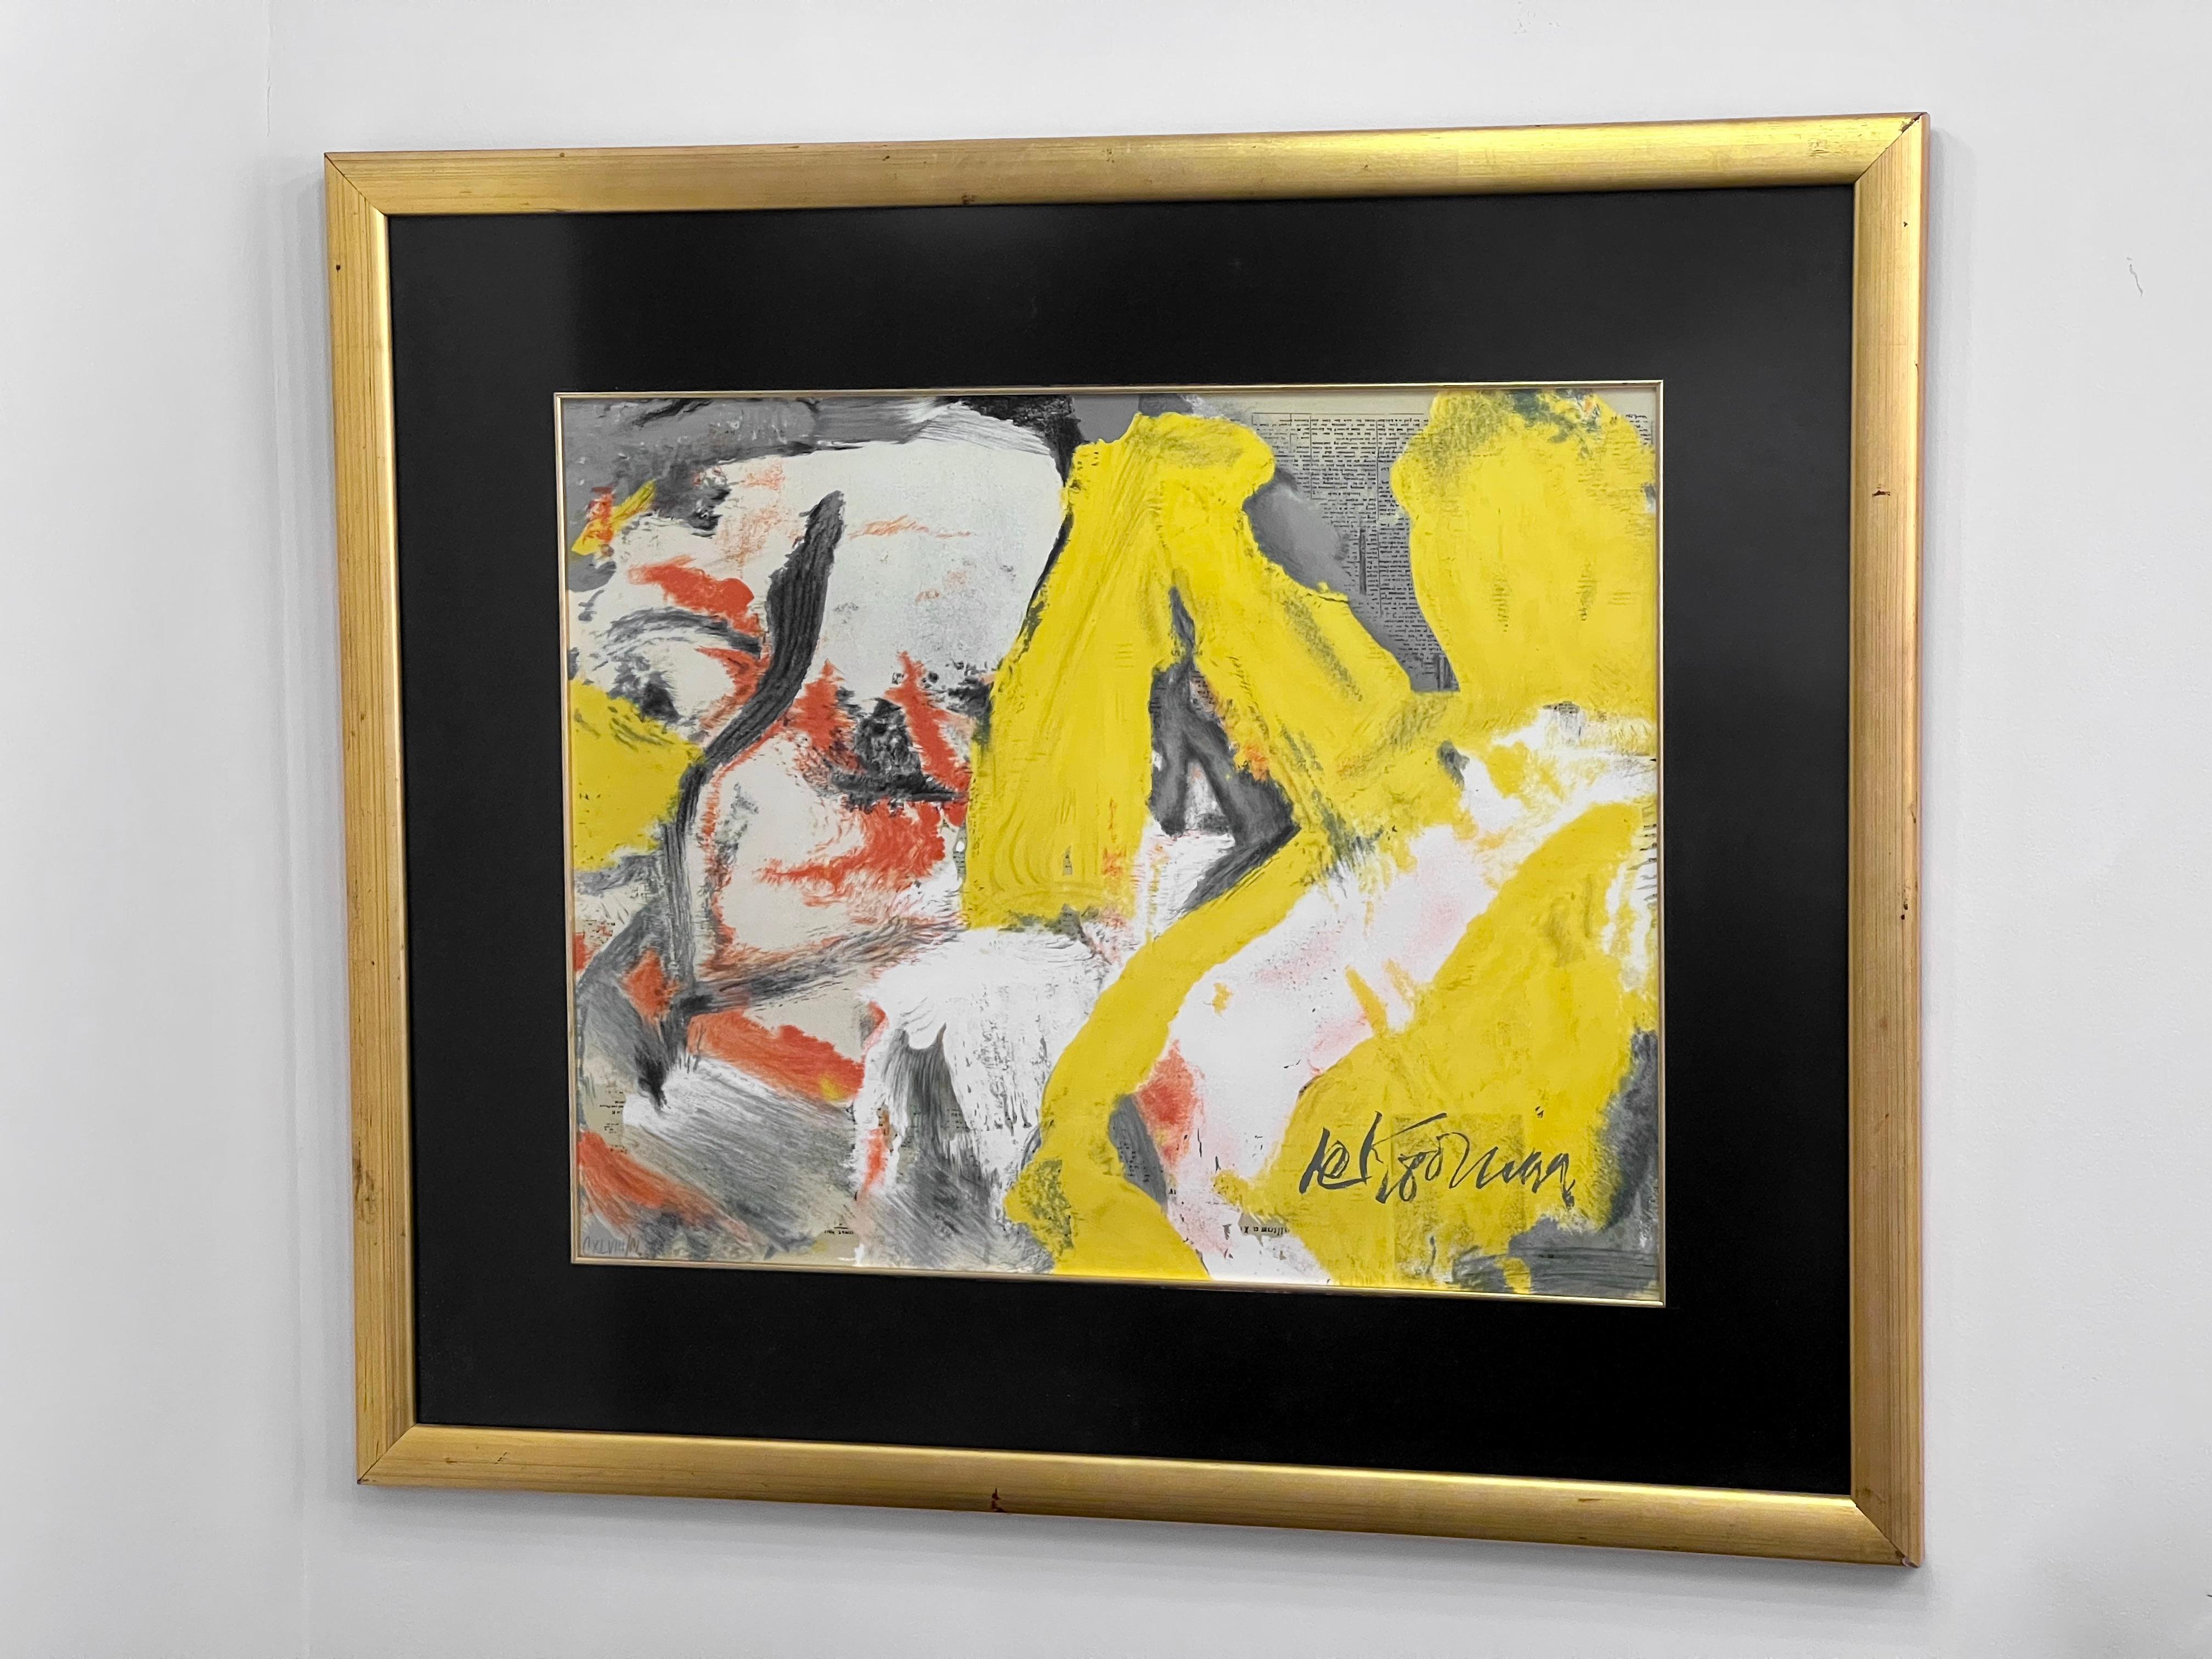 The Man and the Big Blonde is an original lithograph in colors on wove paper by Dutch-American artist Willem de Kooning,1982. Signed in print.
Condition report upon request.
Overall dimensions: 38.25W x 32.5